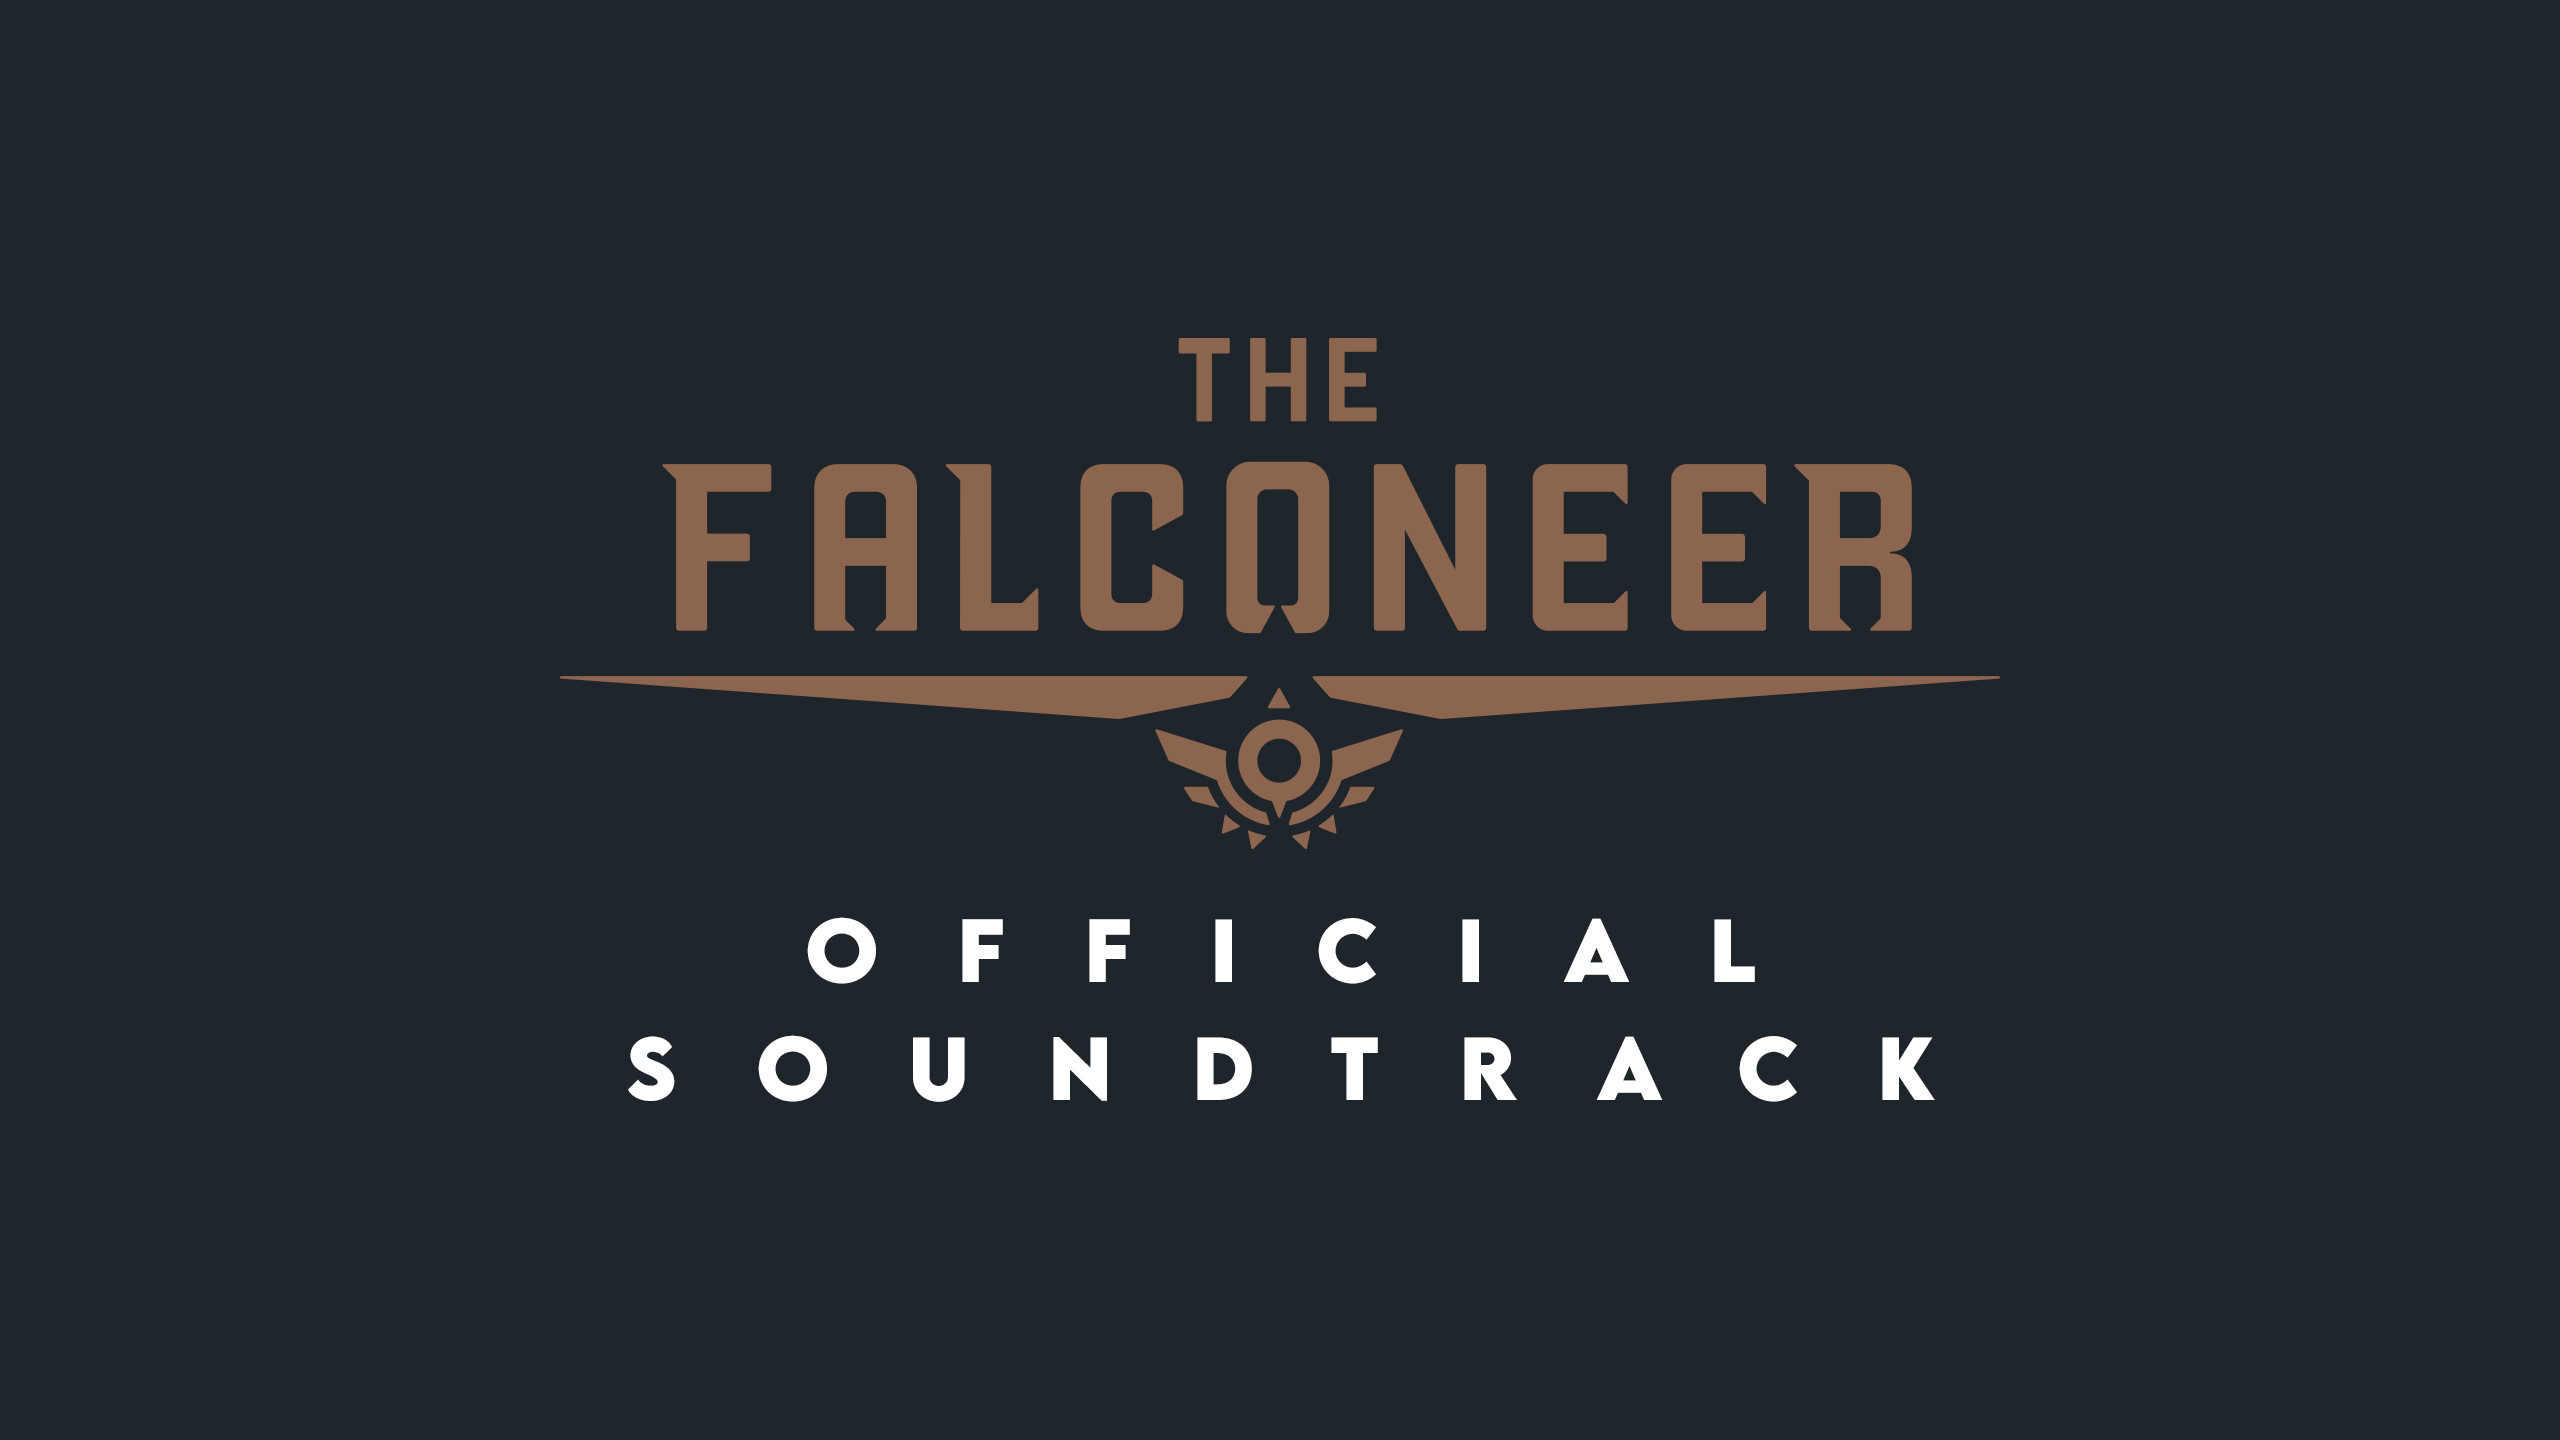 The Falconeer - Official Soundtrack DLC Steam CD Key 5.64 $